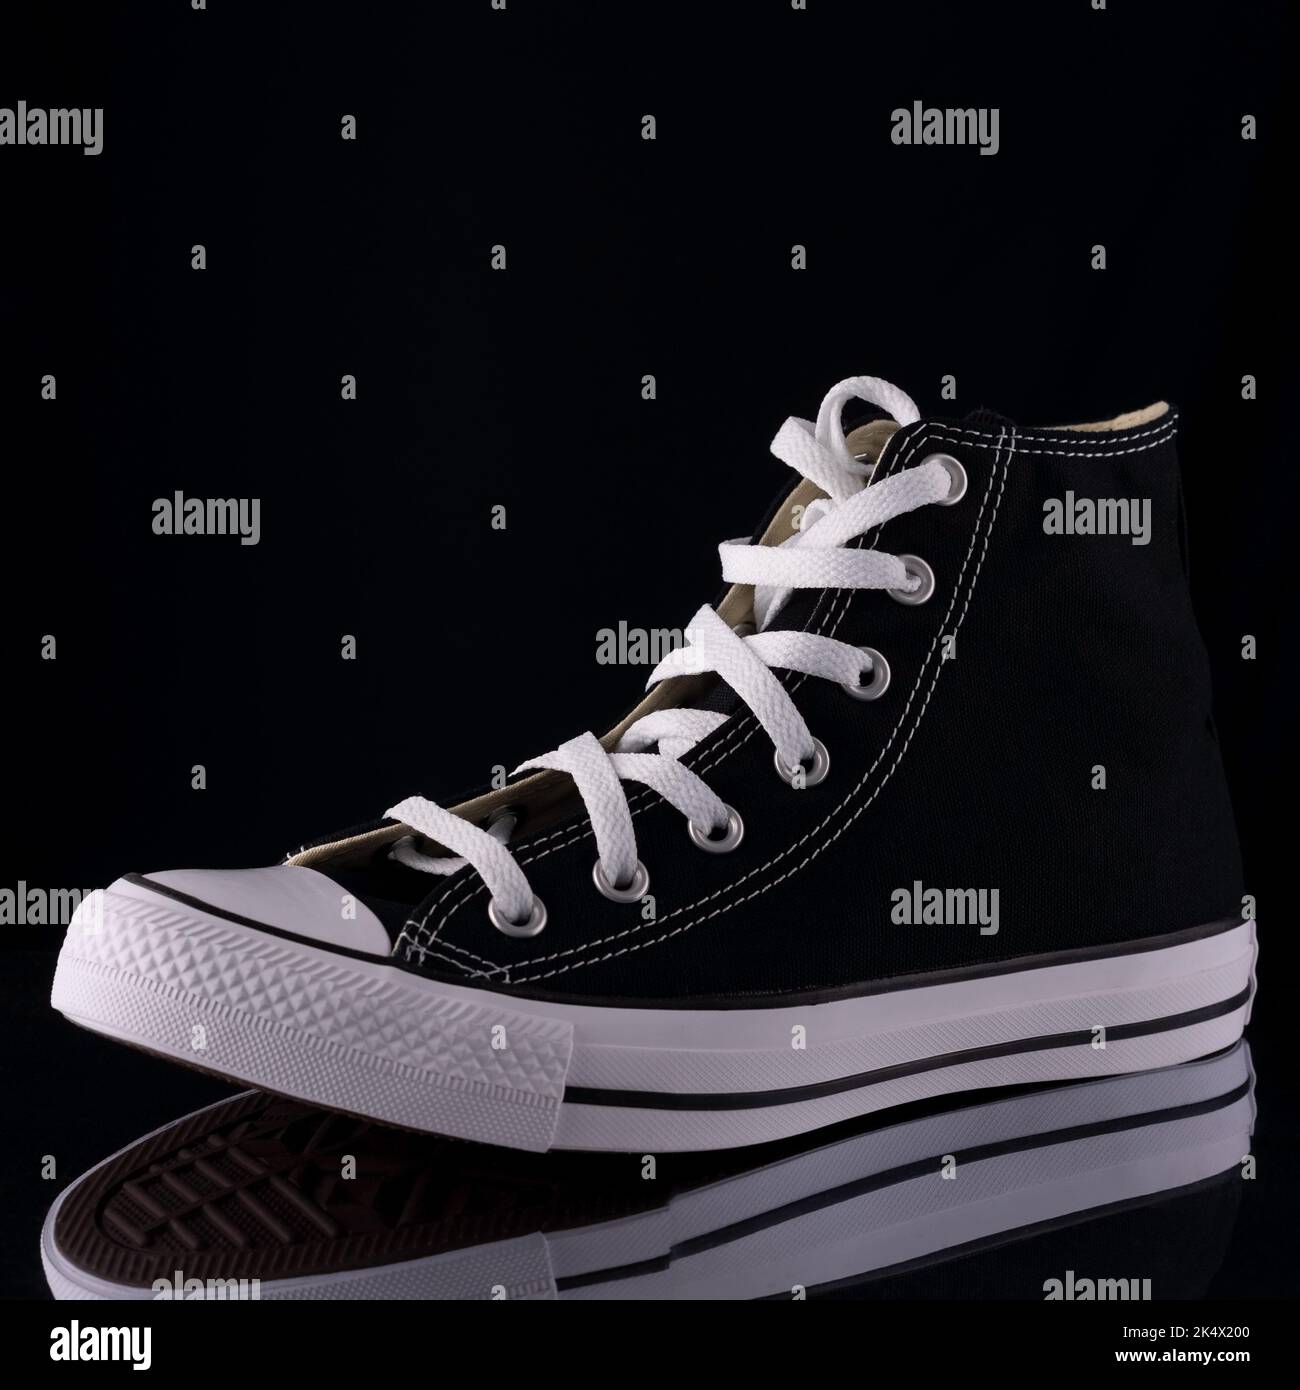 classic black sneakers on a black background Stock Photo